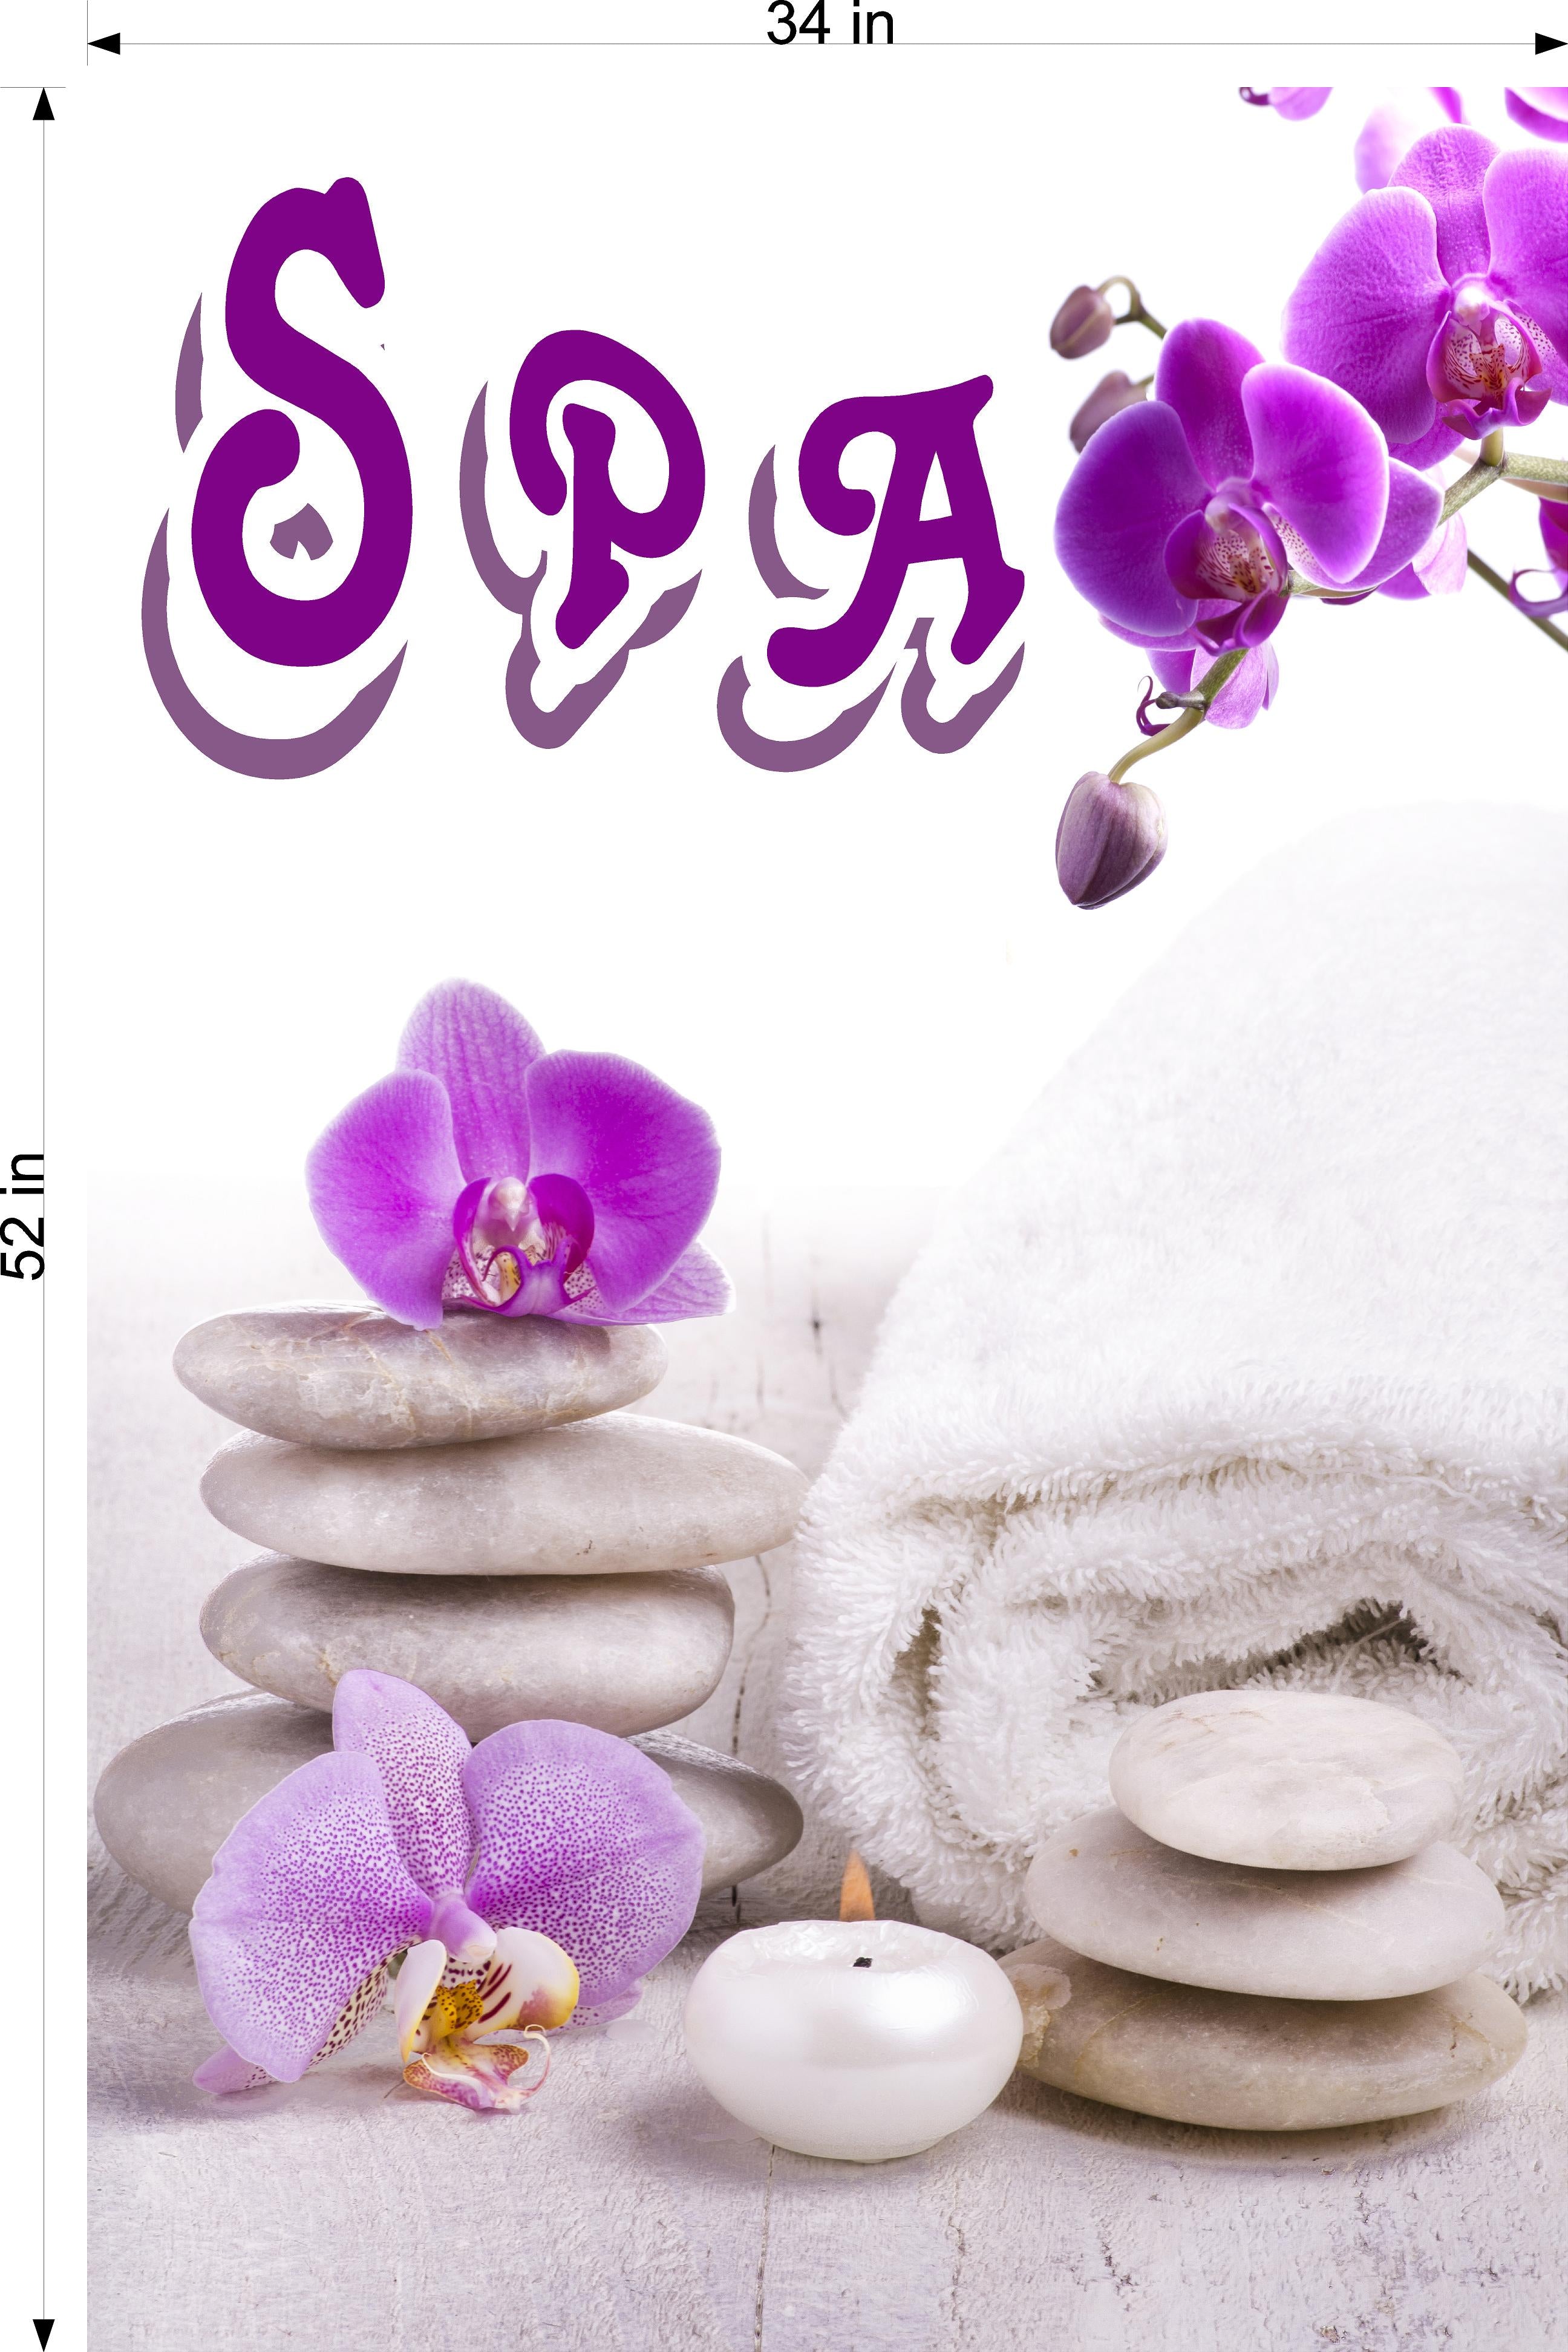 Spa 02 Wallpaper Poster Decal with Adhesive Backing Wall Sticker Decor Indoors Interior Sign Vertical